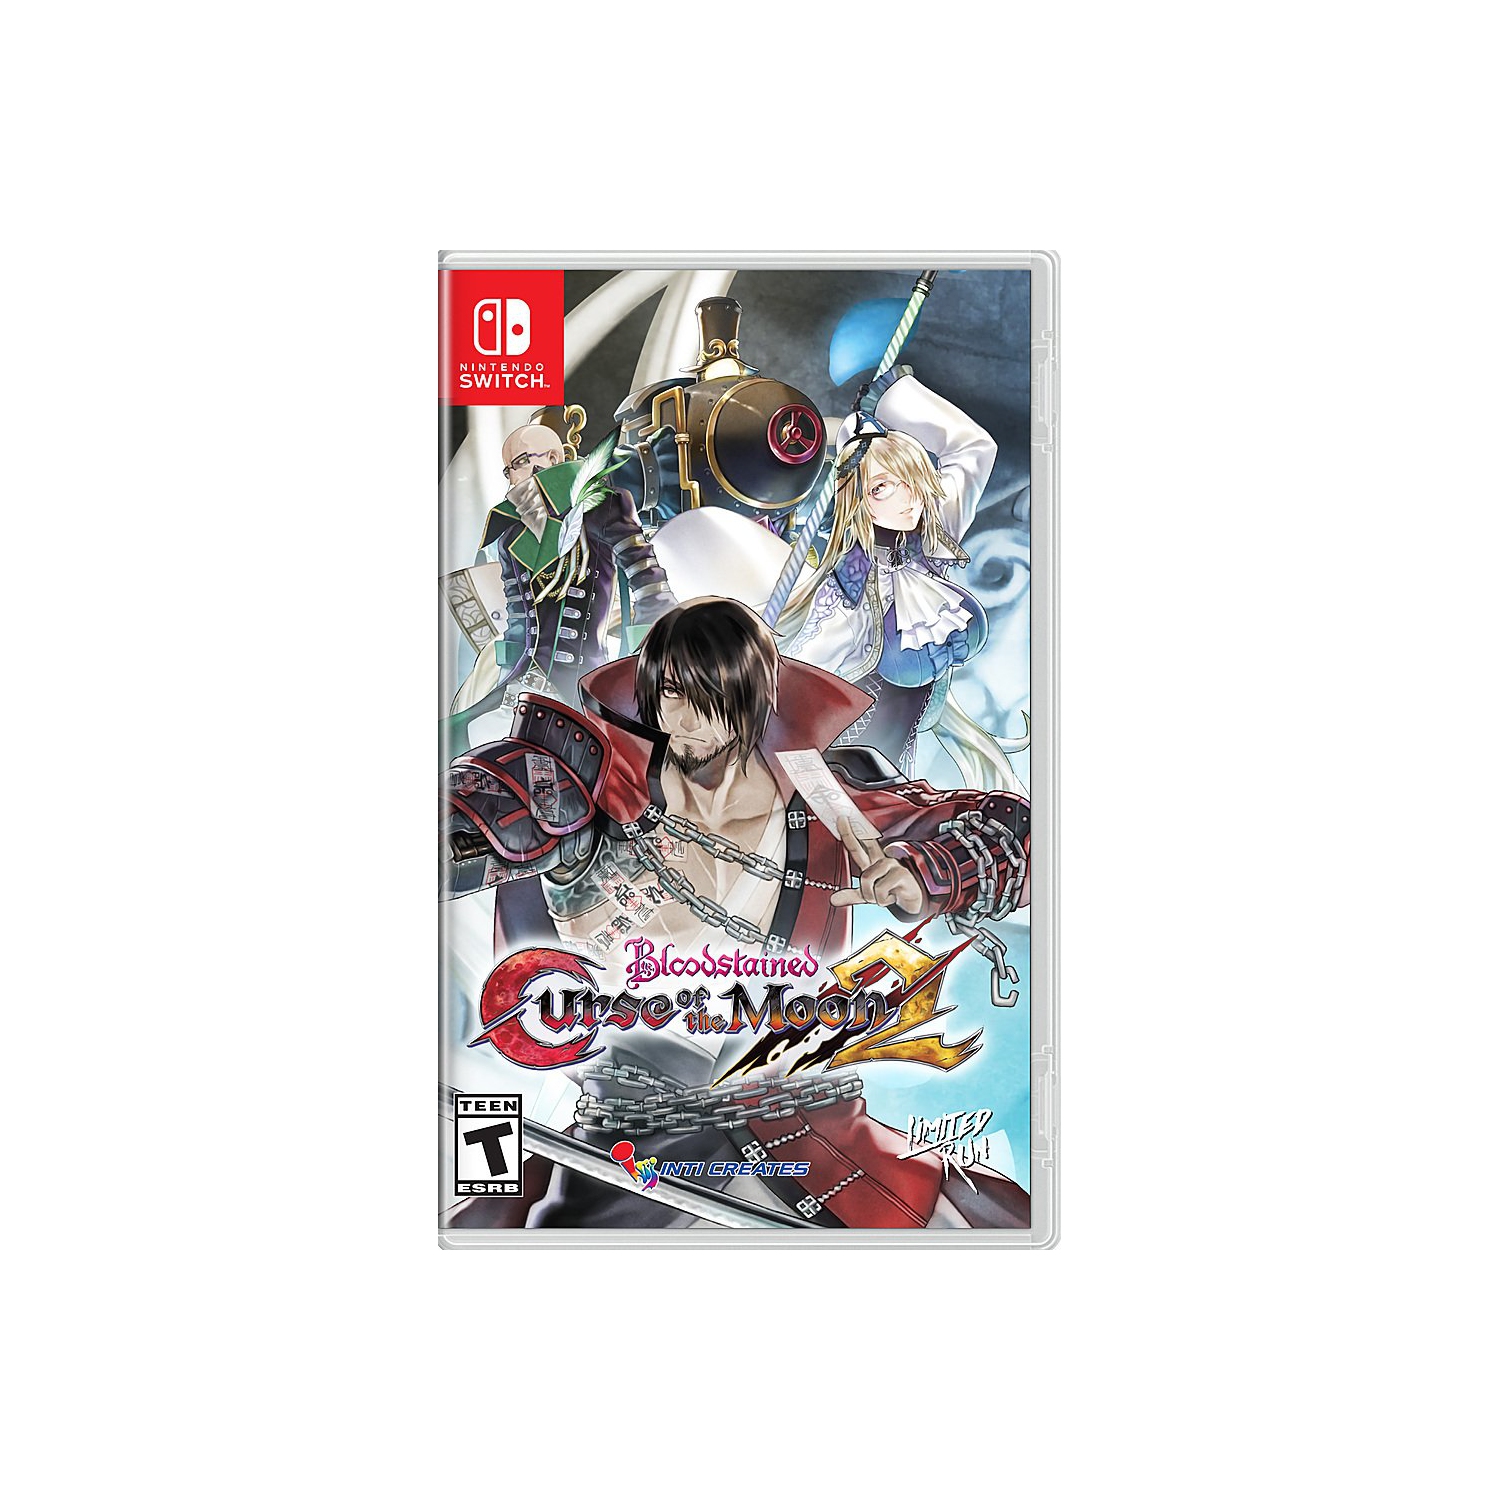 Bloodstained: Curse Of The Moon 2 [Limited Run Games #98] - Nintendo Switch